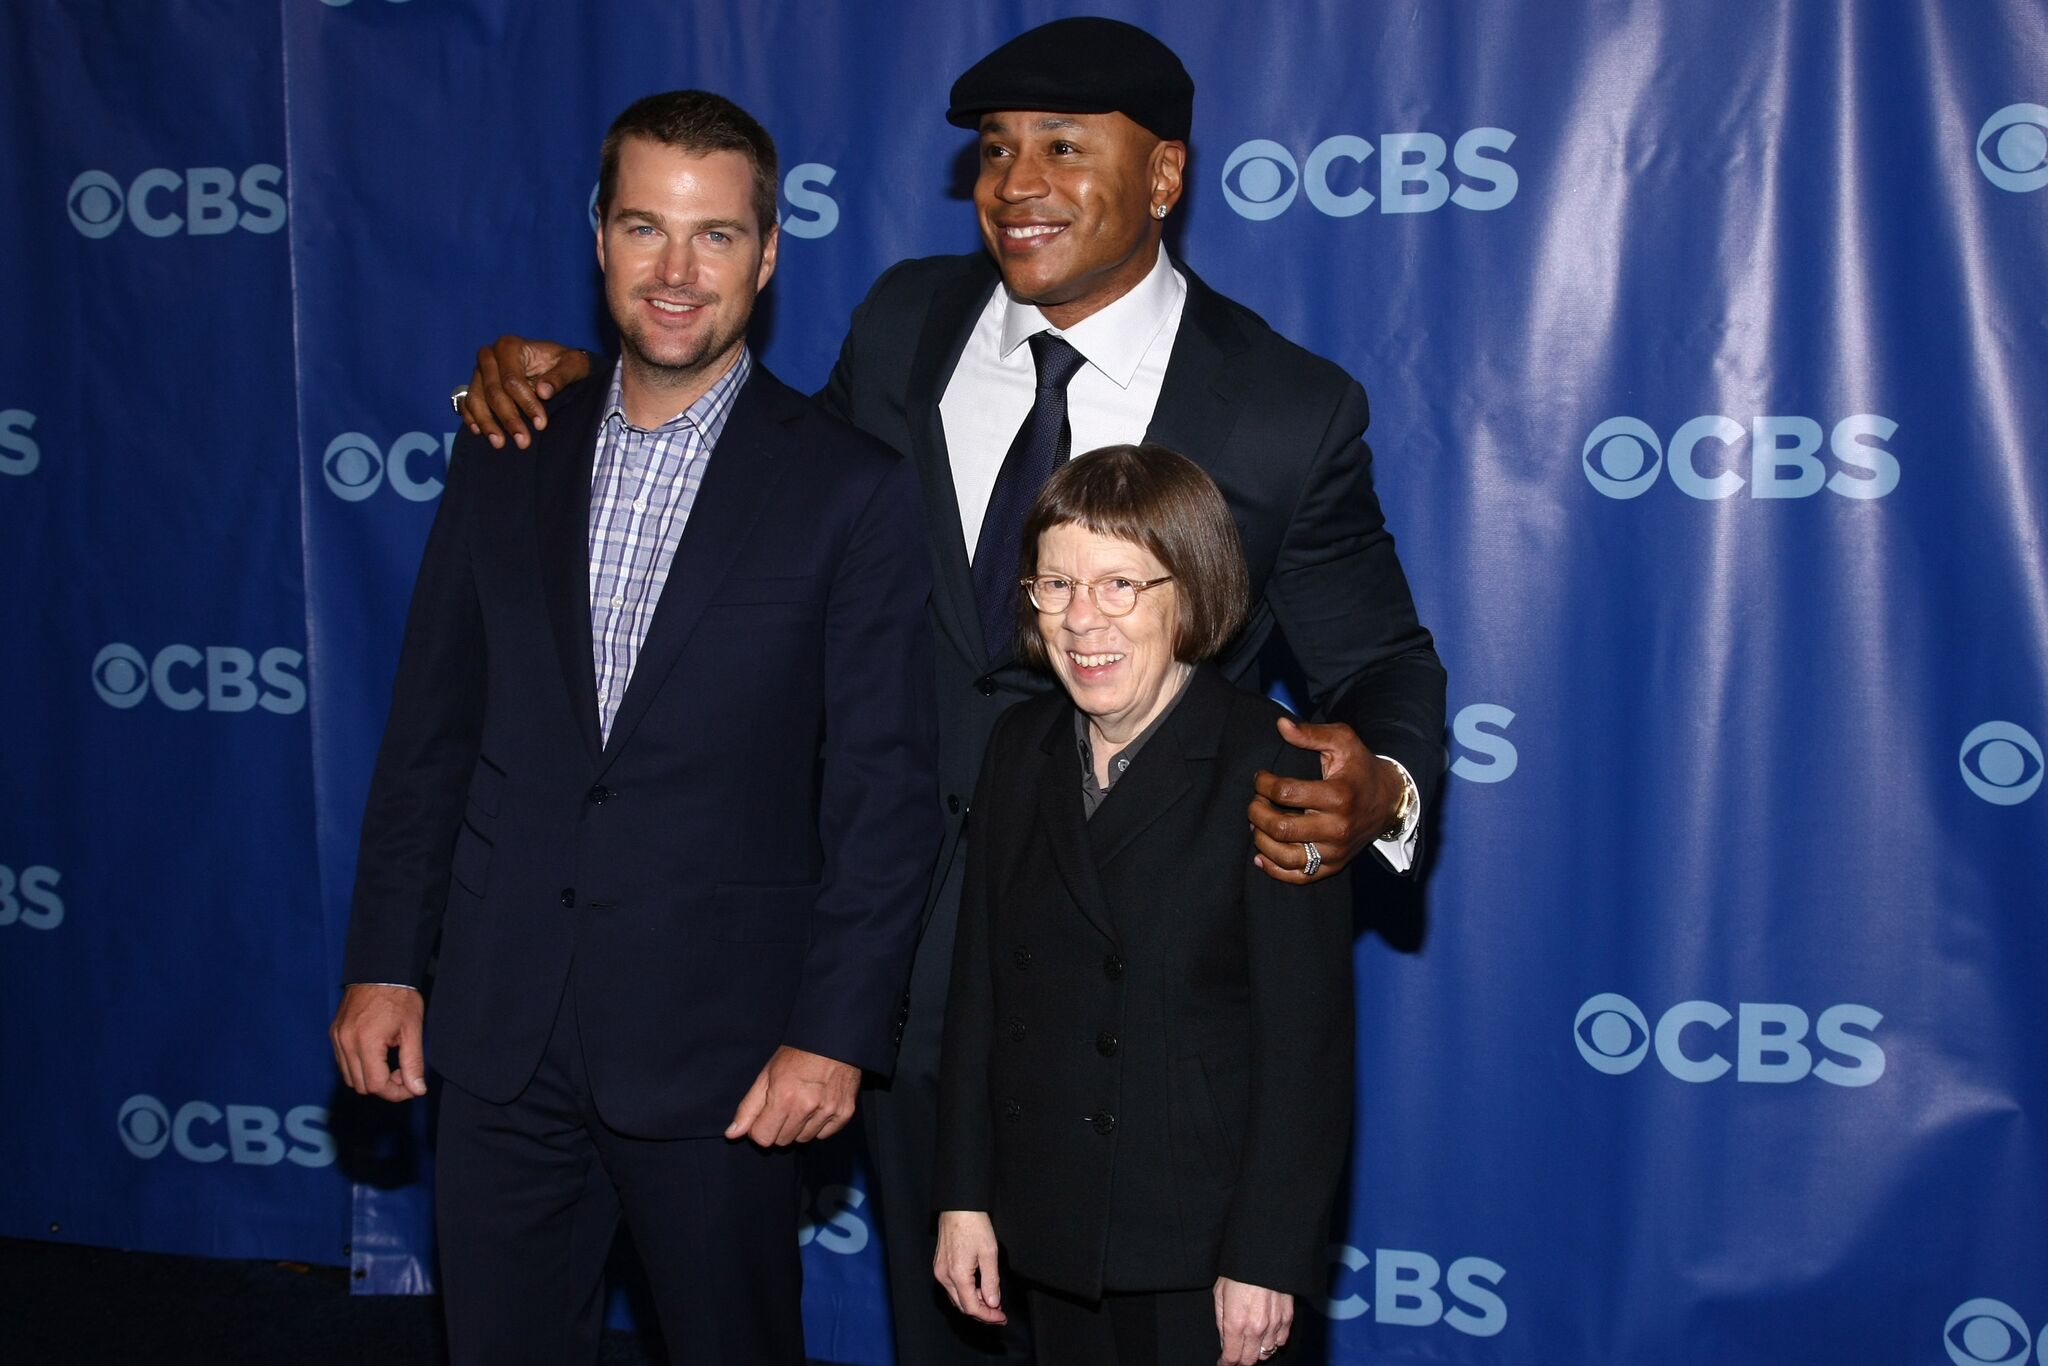 Chris O'Donnell, LL Cool J und Linda Hunt, 2011 CBS Upfront am 18. Mai 2011 | Quelle: Getty Images